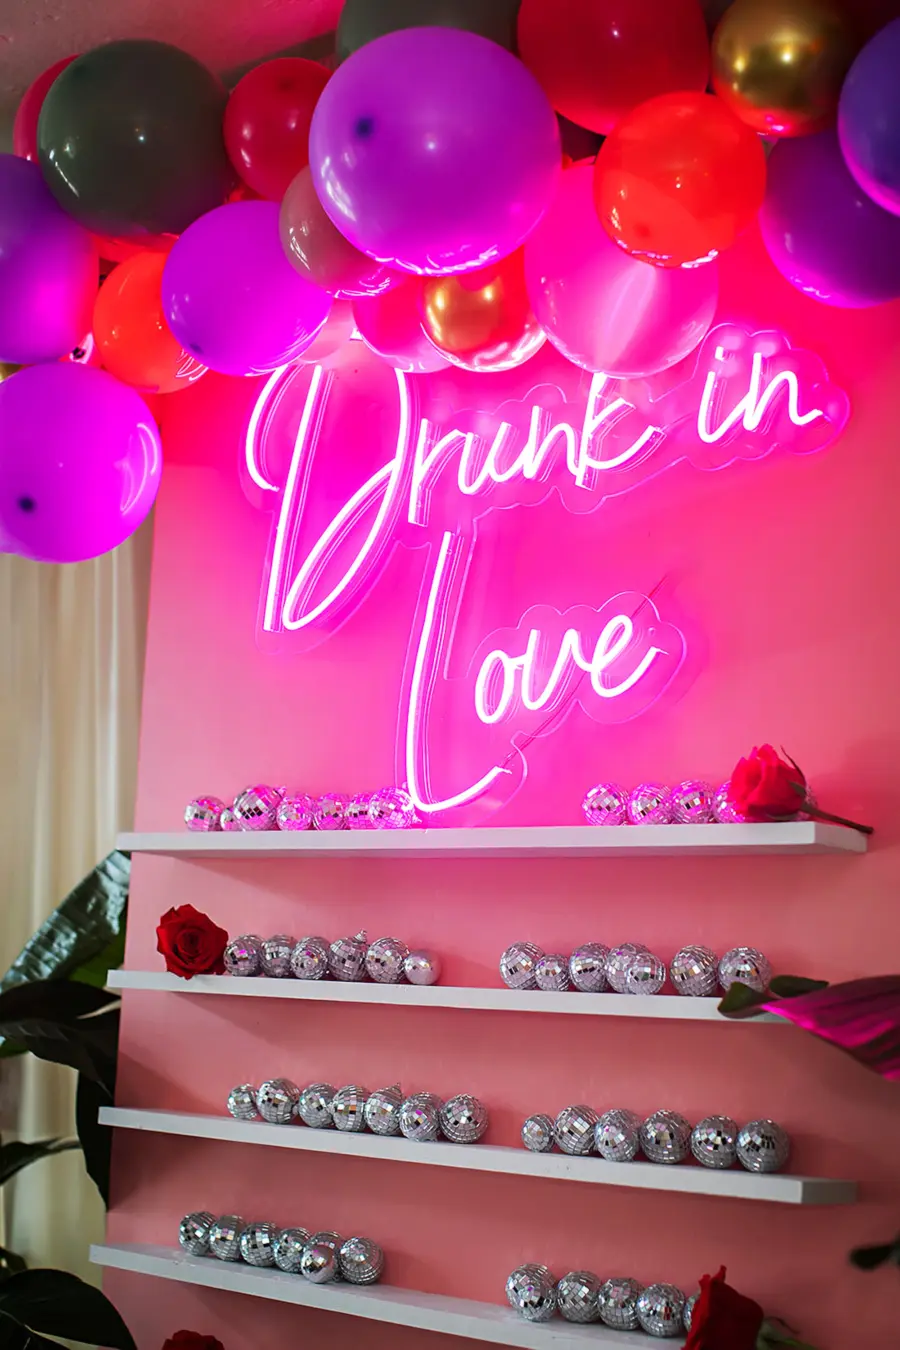 Whimsical Drunk In Love Neon Sign Wedding Reception Seating Chart Display Ideas | Disco Ball and Balloon Arch Decor Inspiration